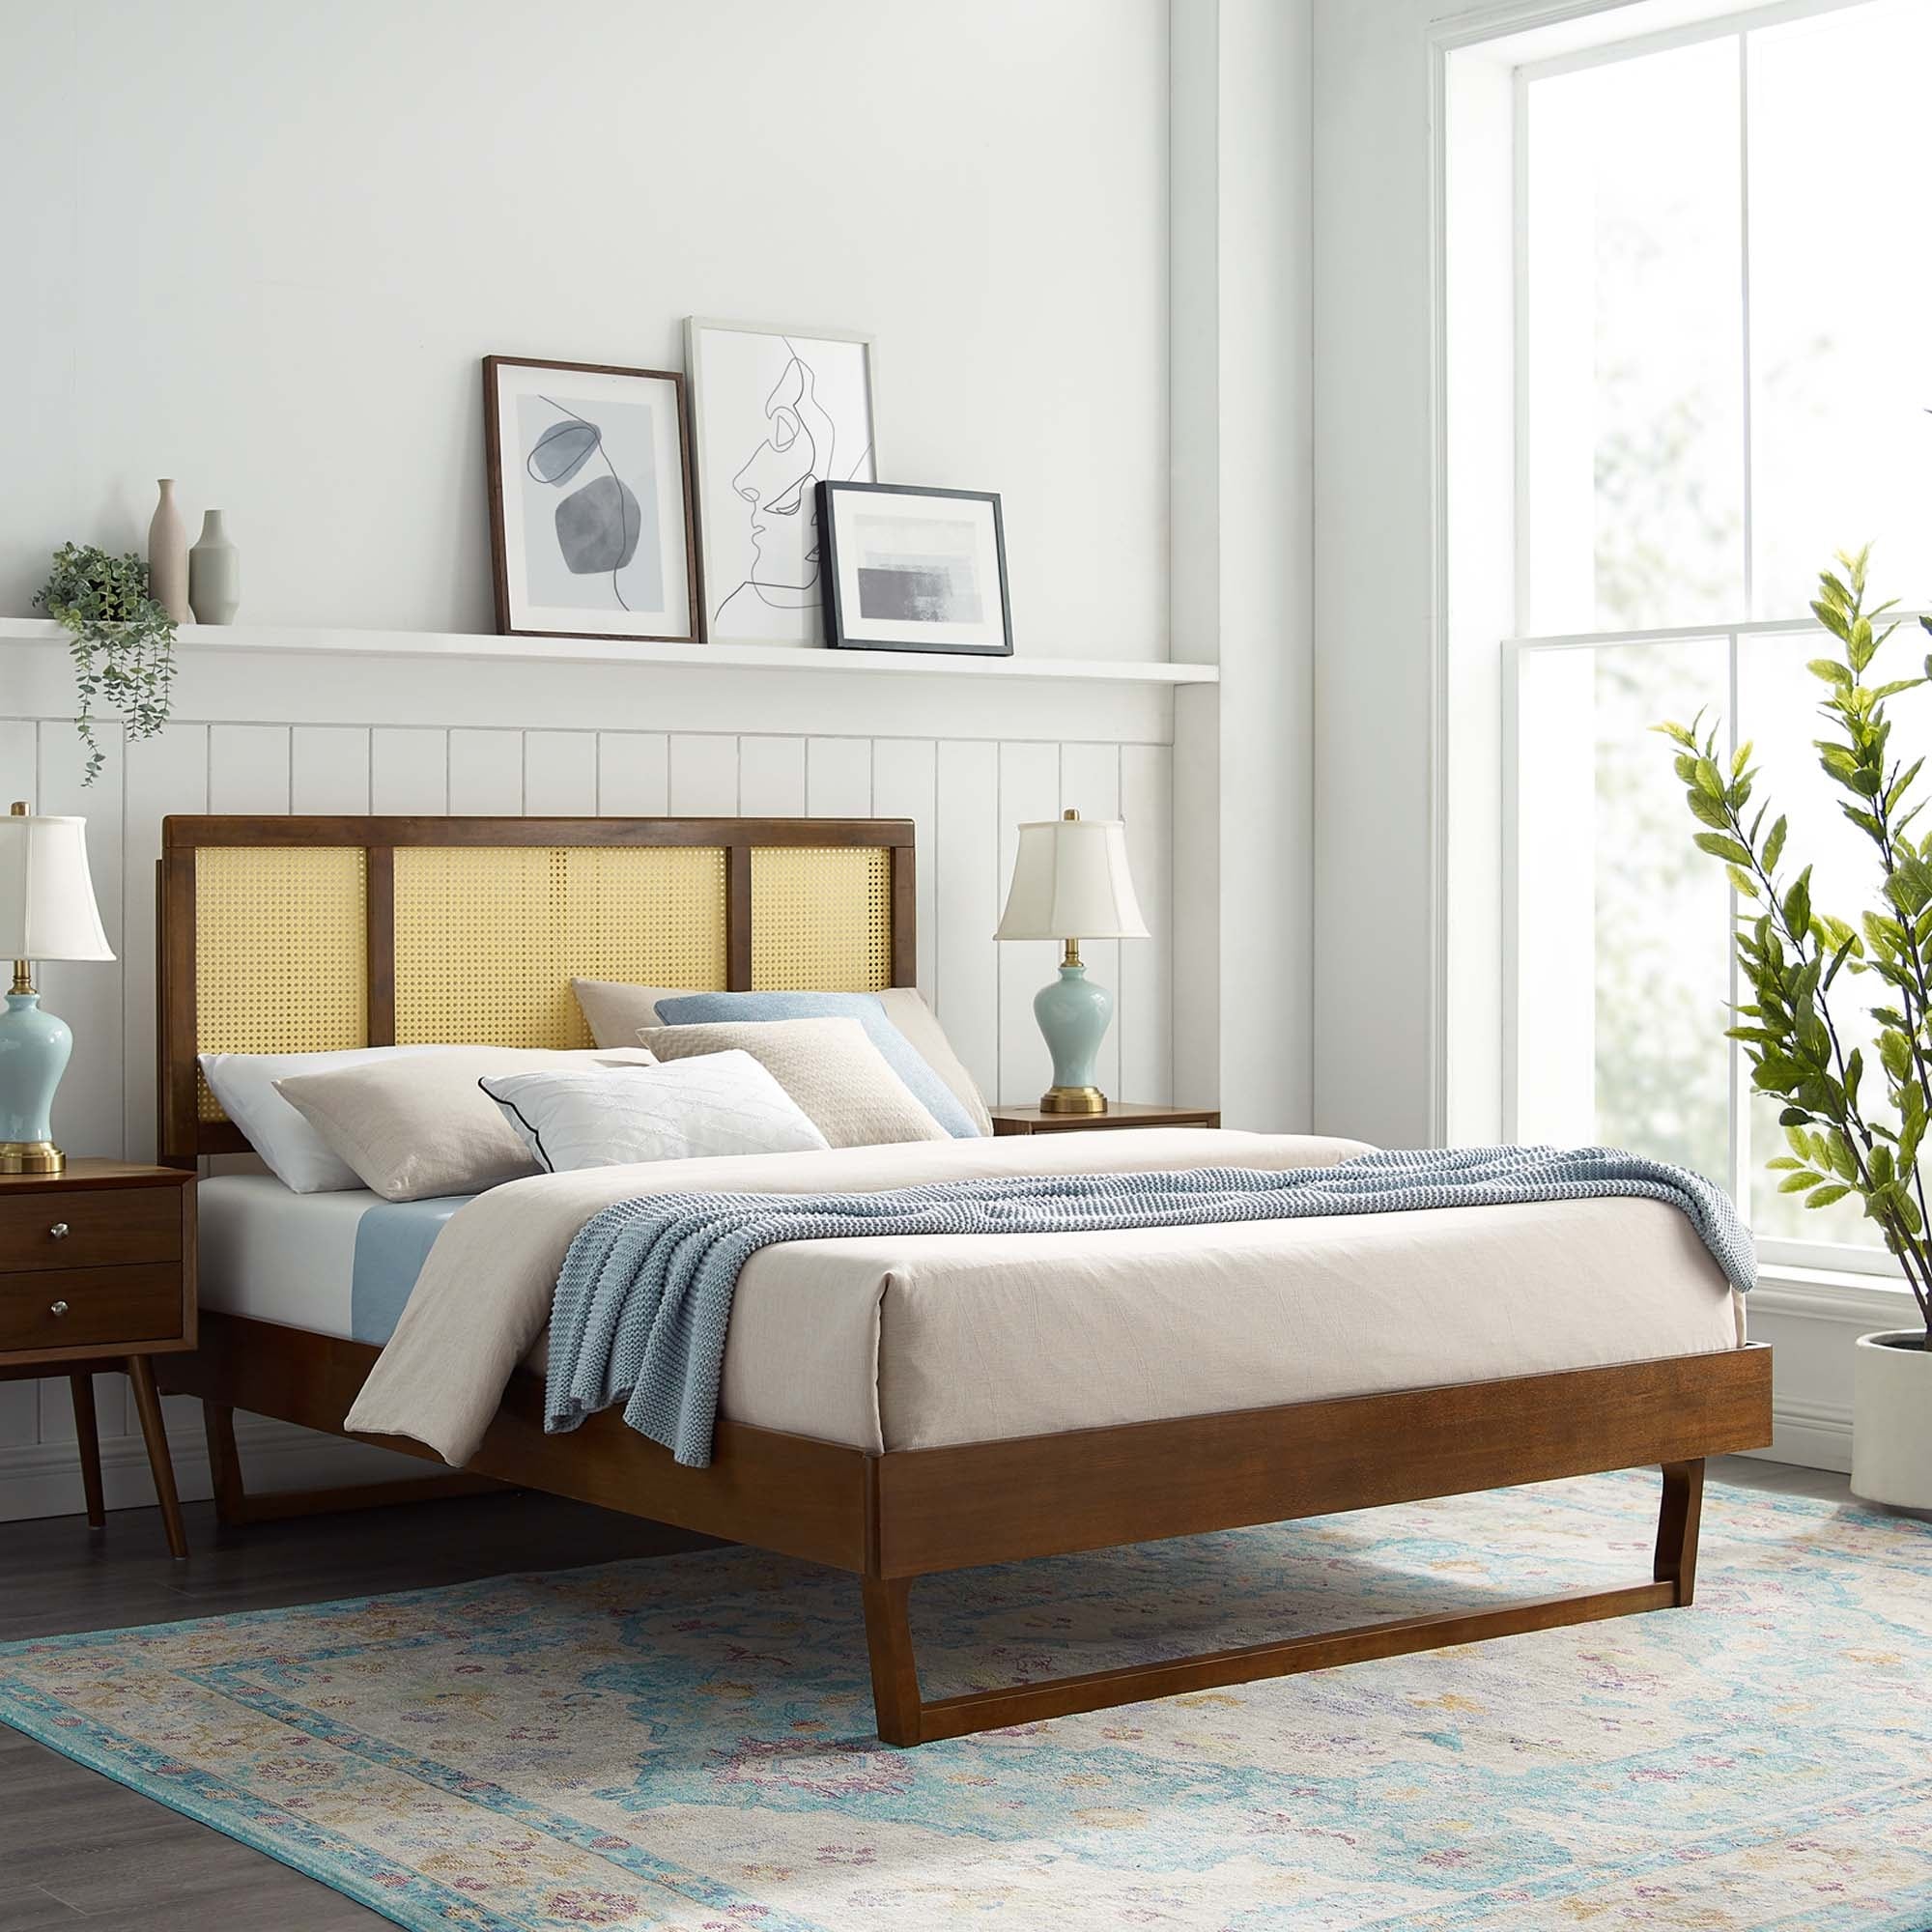 Kelsea Cane And Wood King Platform Bed With Angular Legs